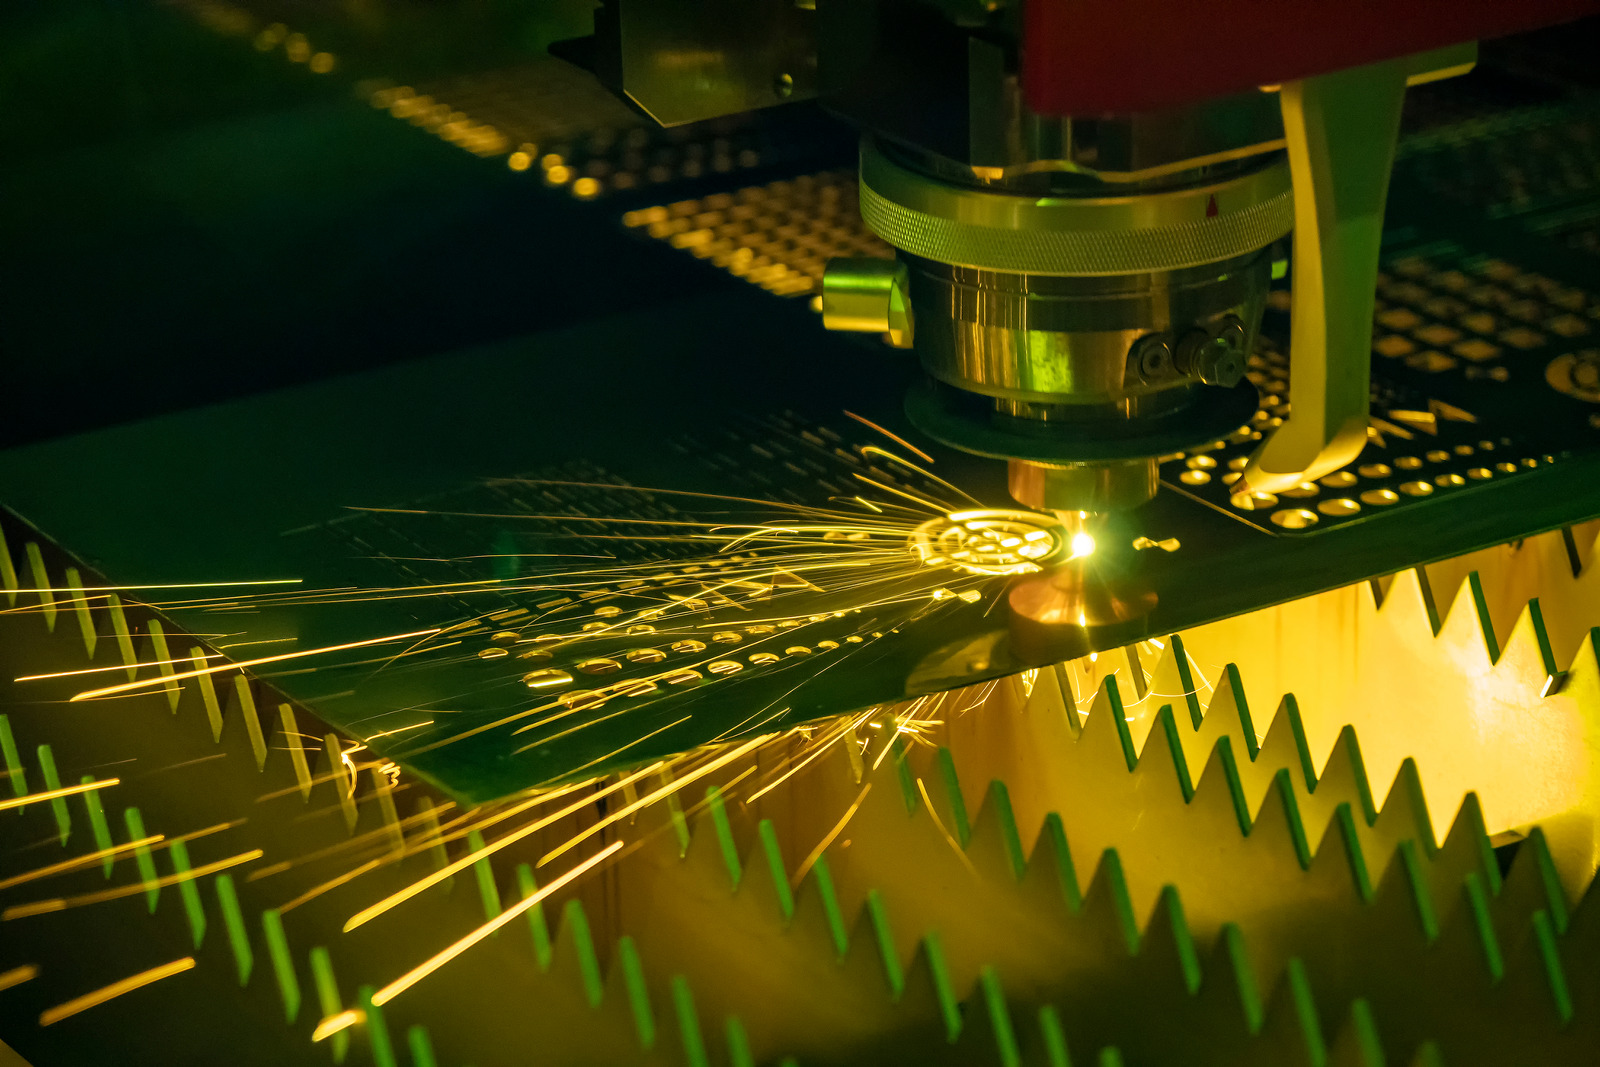 How to Get the Best Results When Laser Cutting Zinc